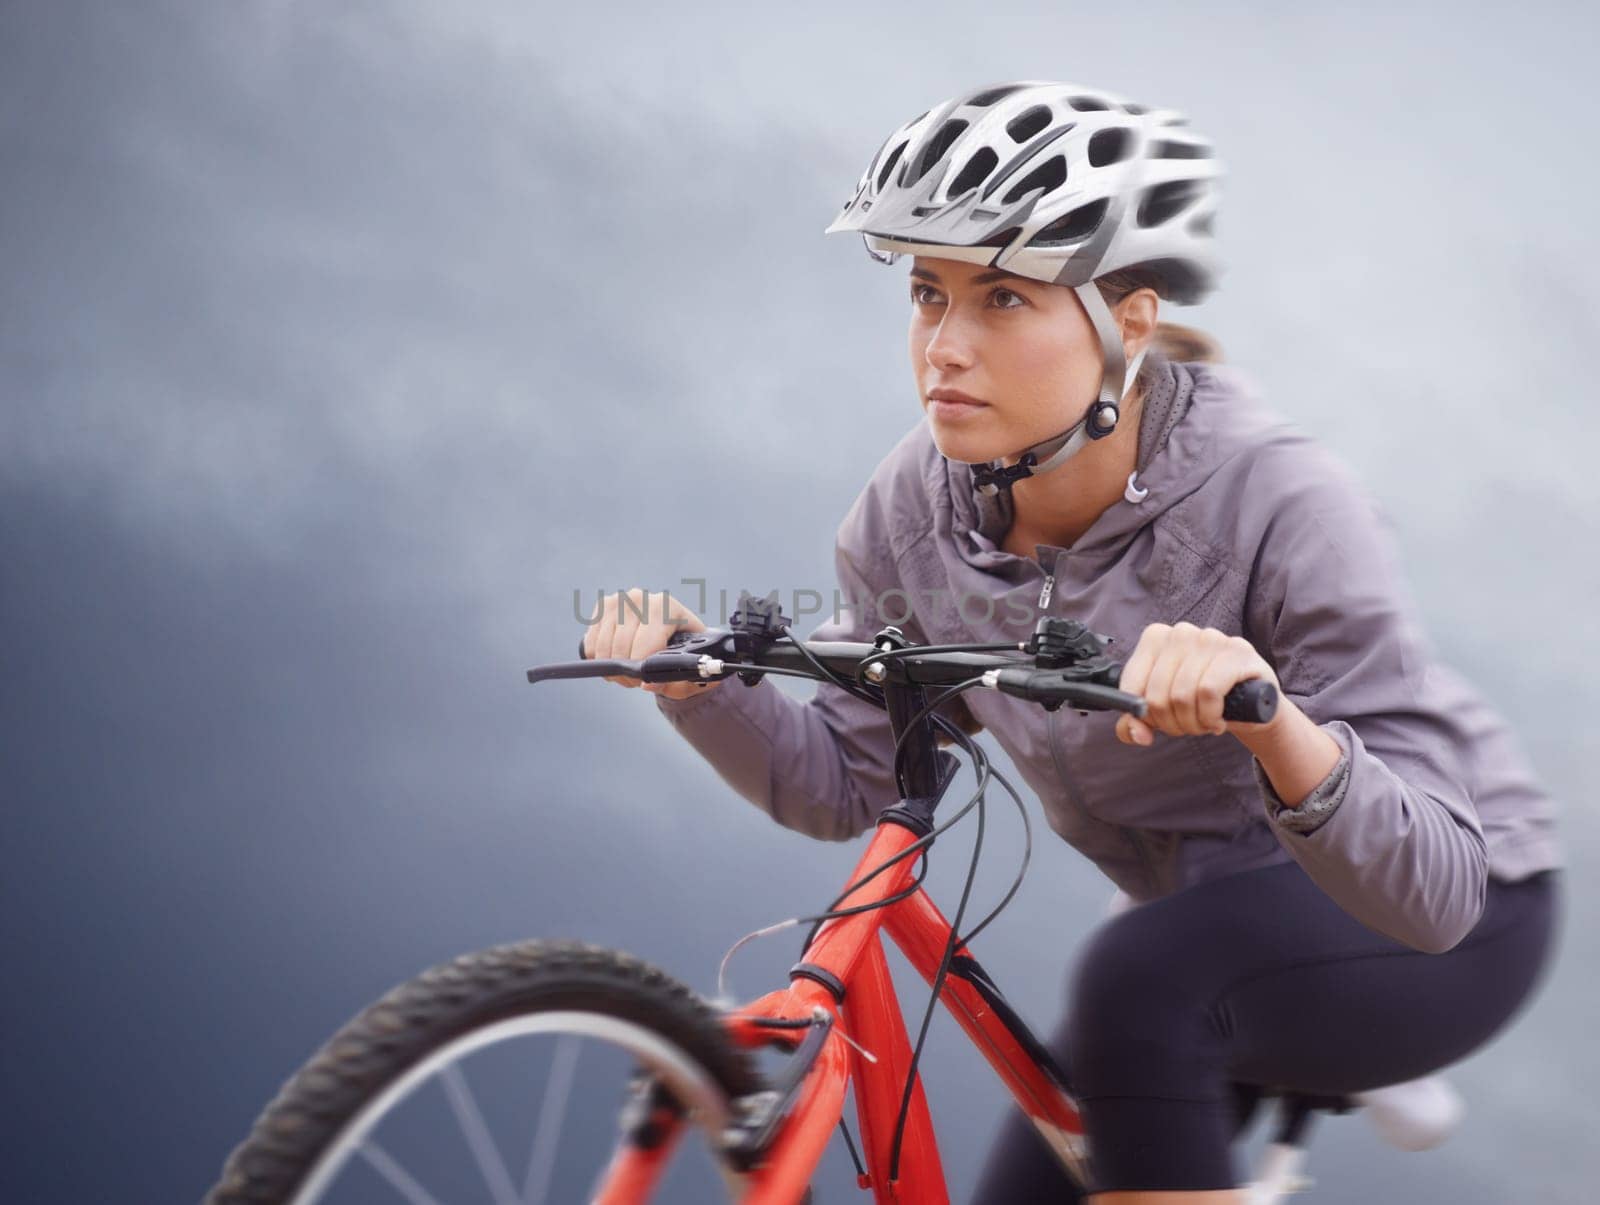 Woman, bike and nature with cycling, speed and fitness for health and wellness or workout. Athlete, ride and exercise for training, transportation and adventure with helmet and cardio or confidence.